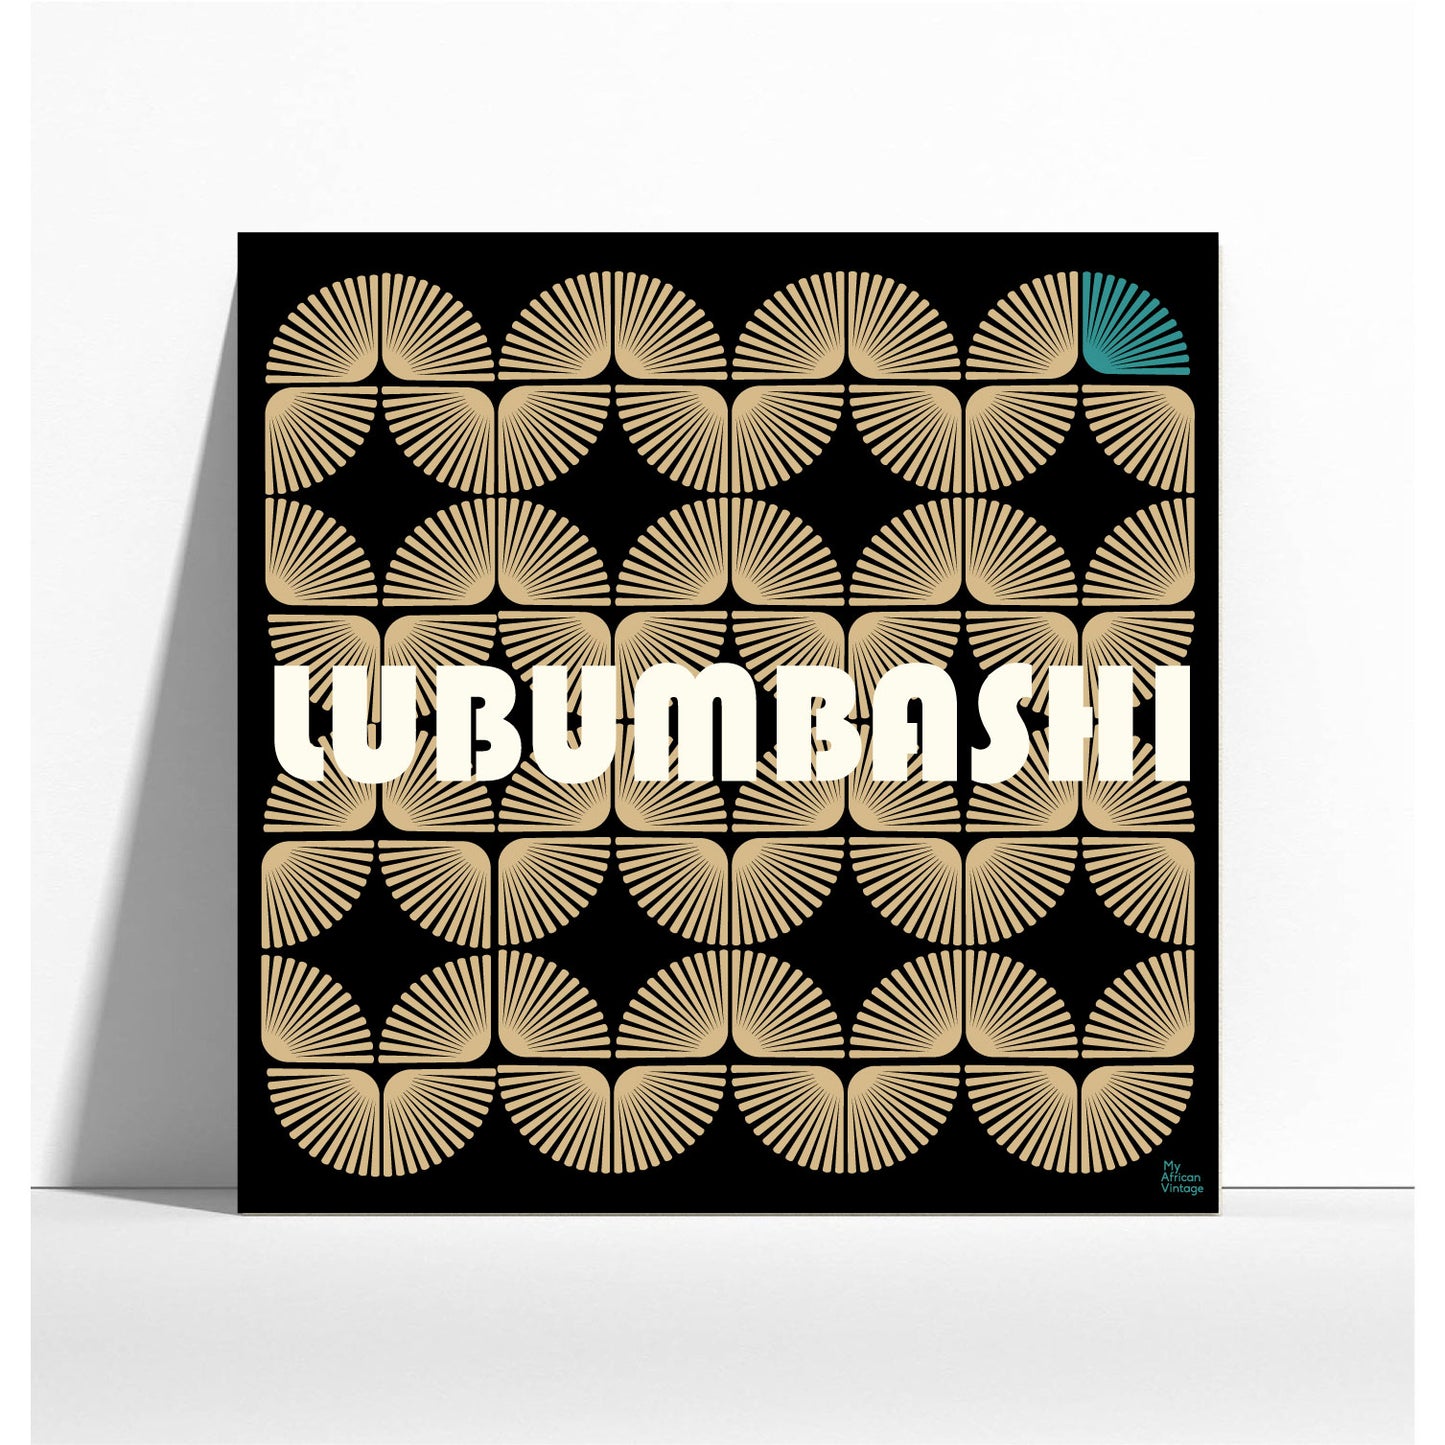 Retro style poster "Lubumbashi" - collection "My African Vintage